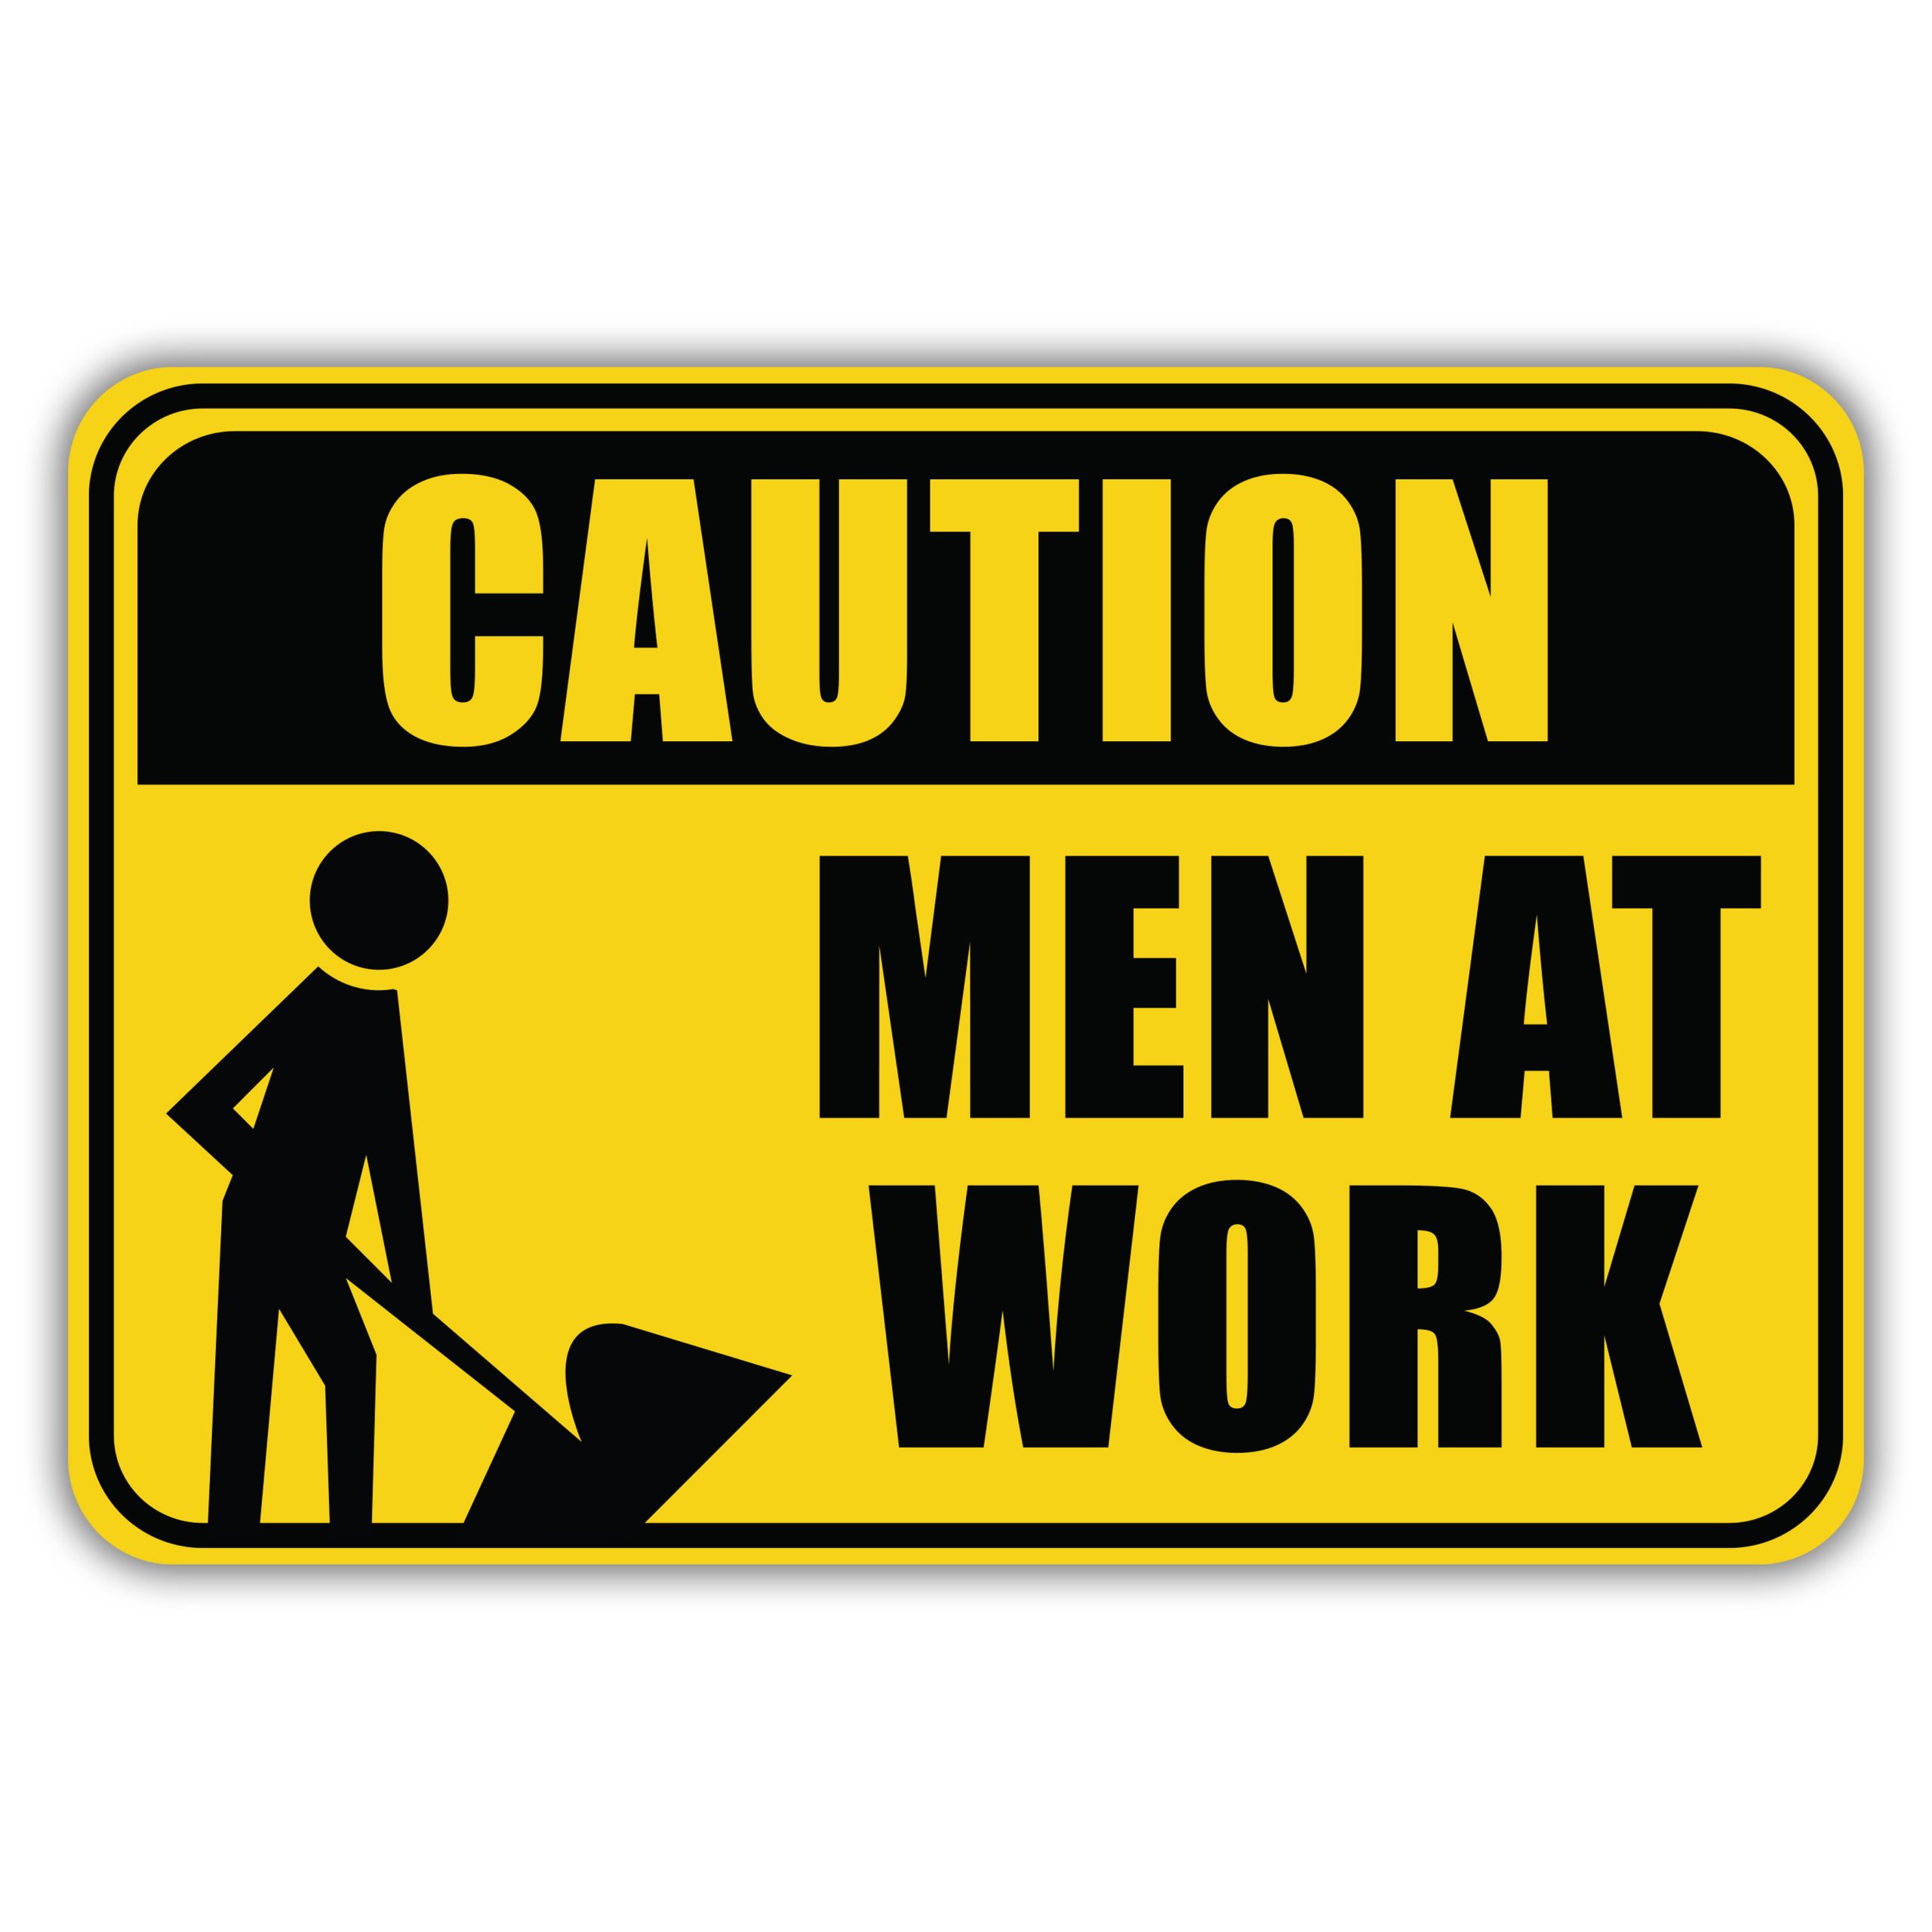 Caution Men At Work American Sign Company